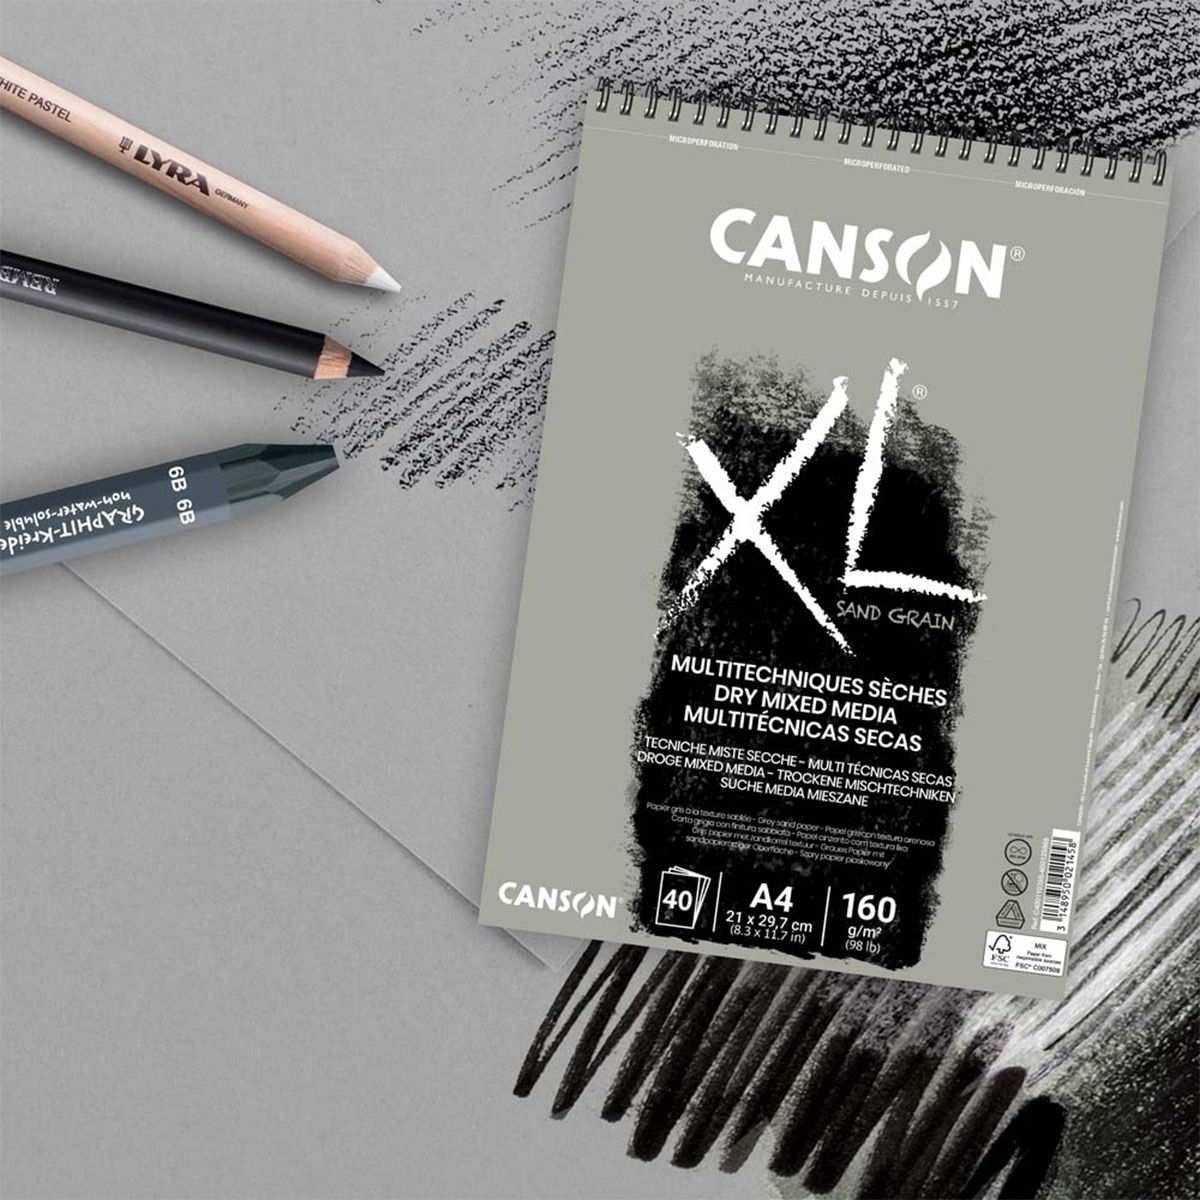 Canson XL Sand Grain Mixed Media Pads - Gray